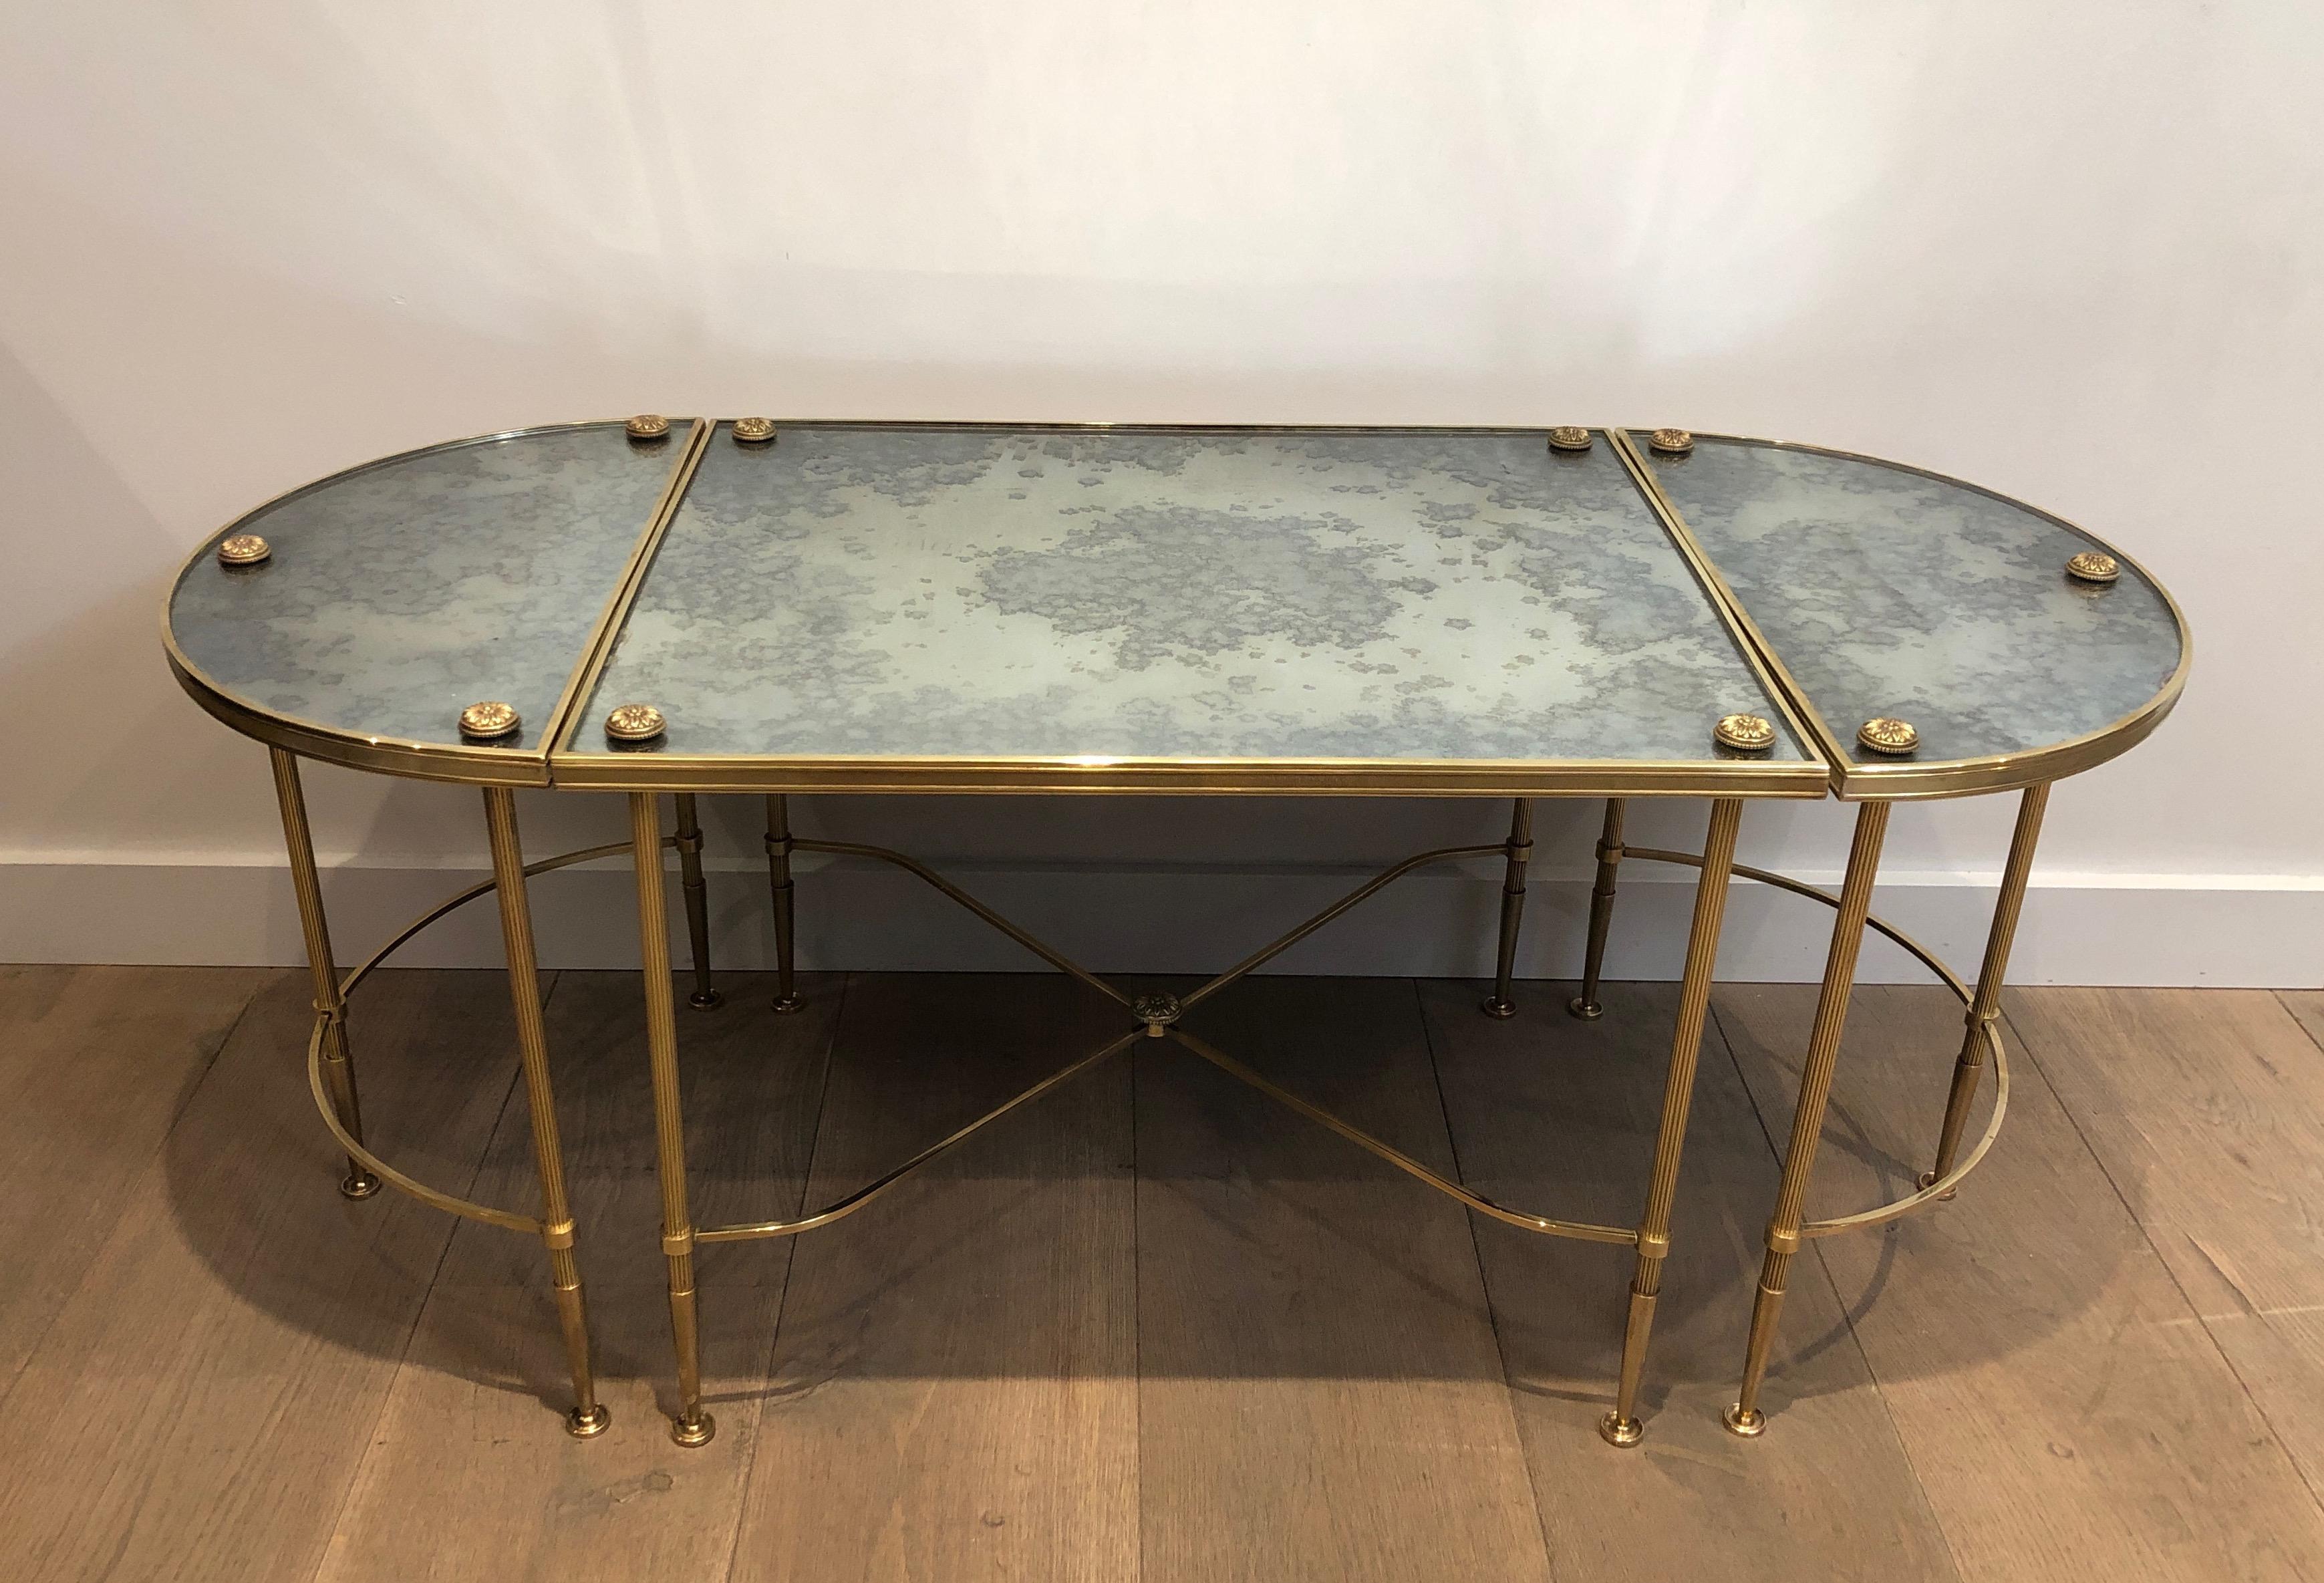 French Tripartite Brass Coffee Table with Eglomized Tops by Maison Baguès